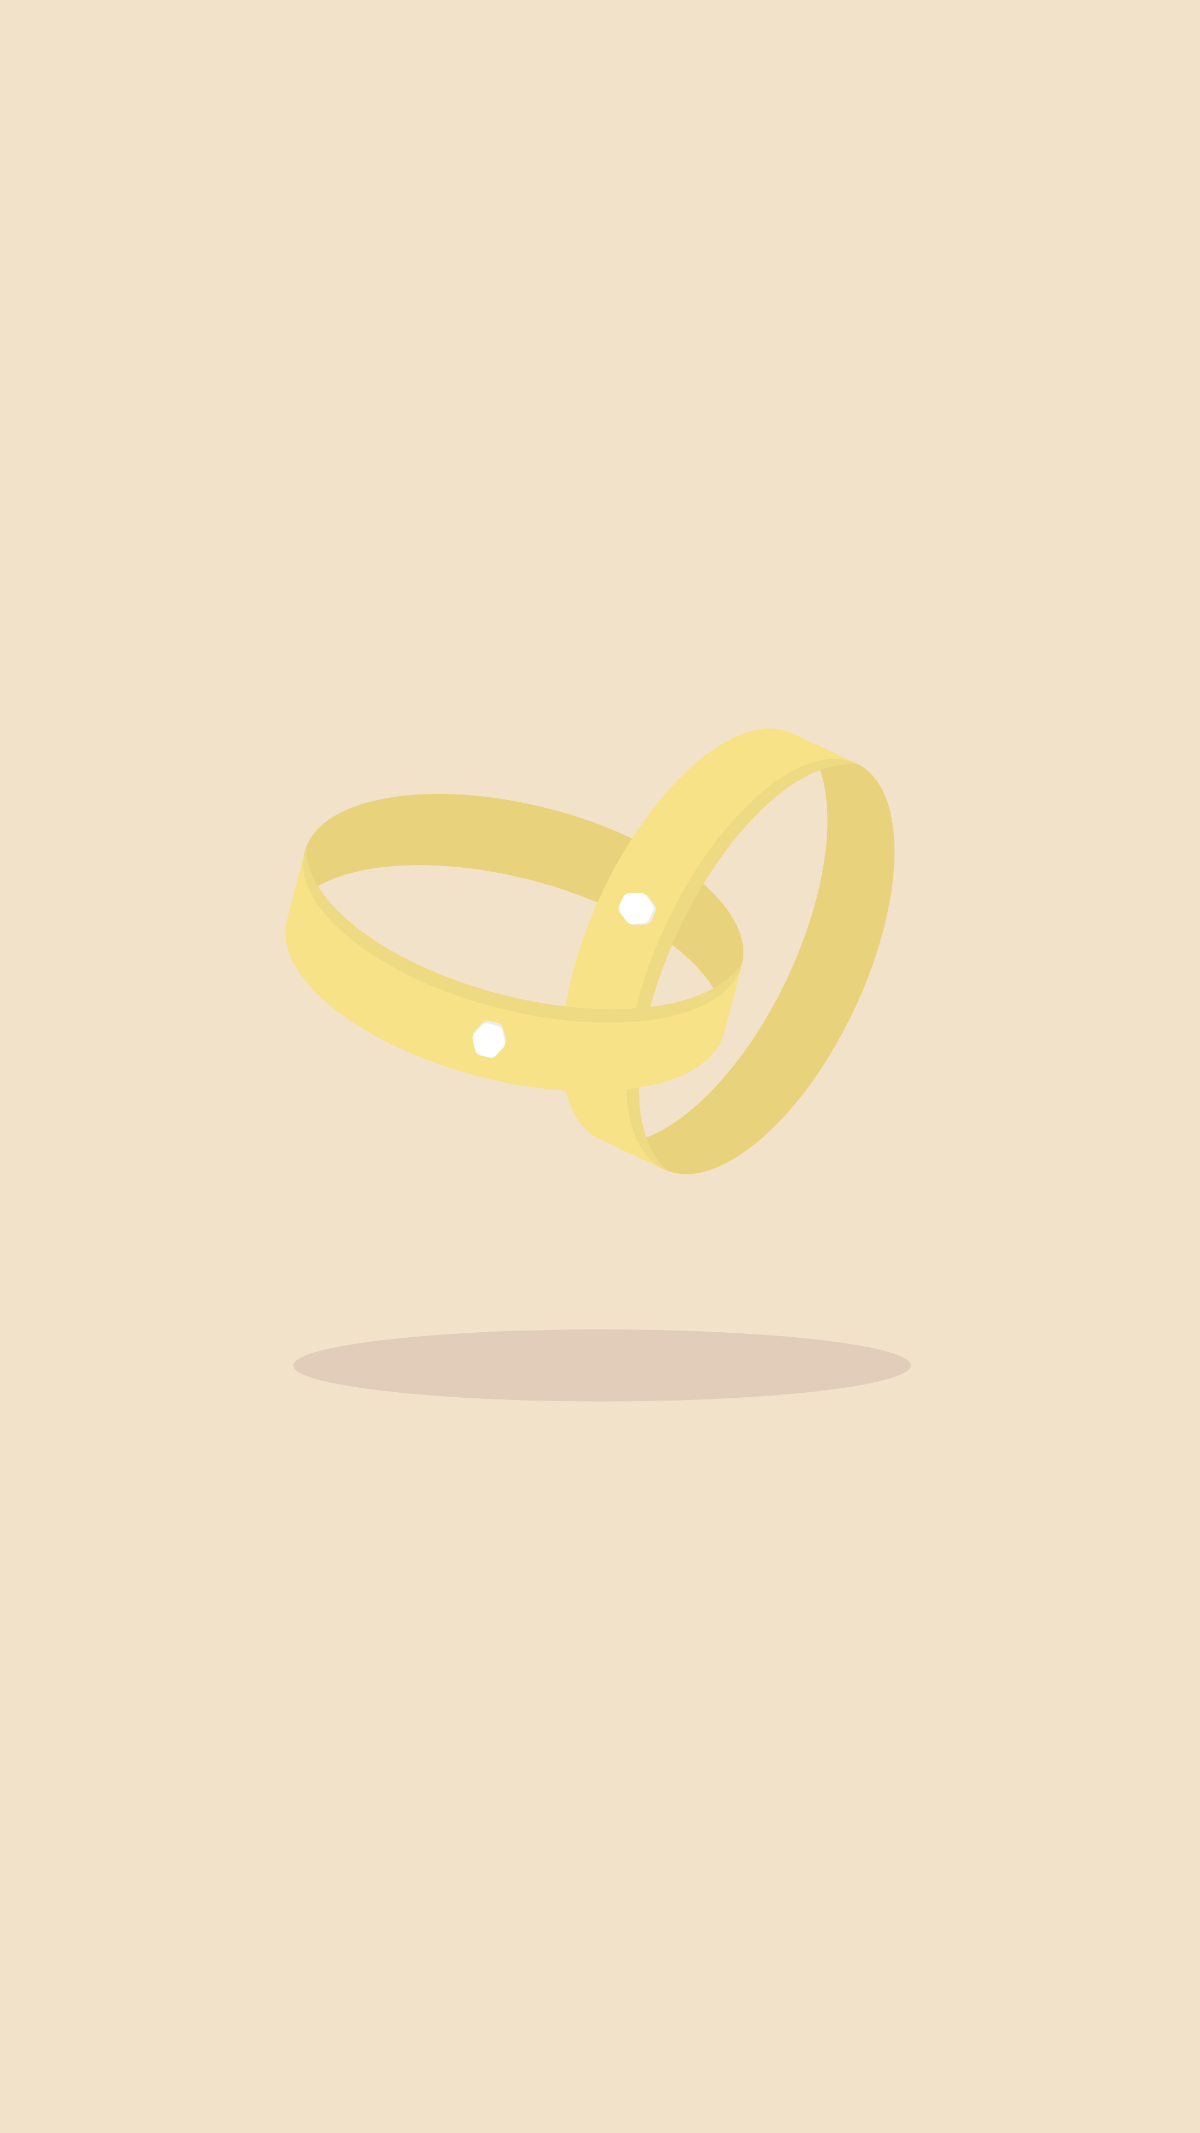 Wedding Ring Mobile Background Template